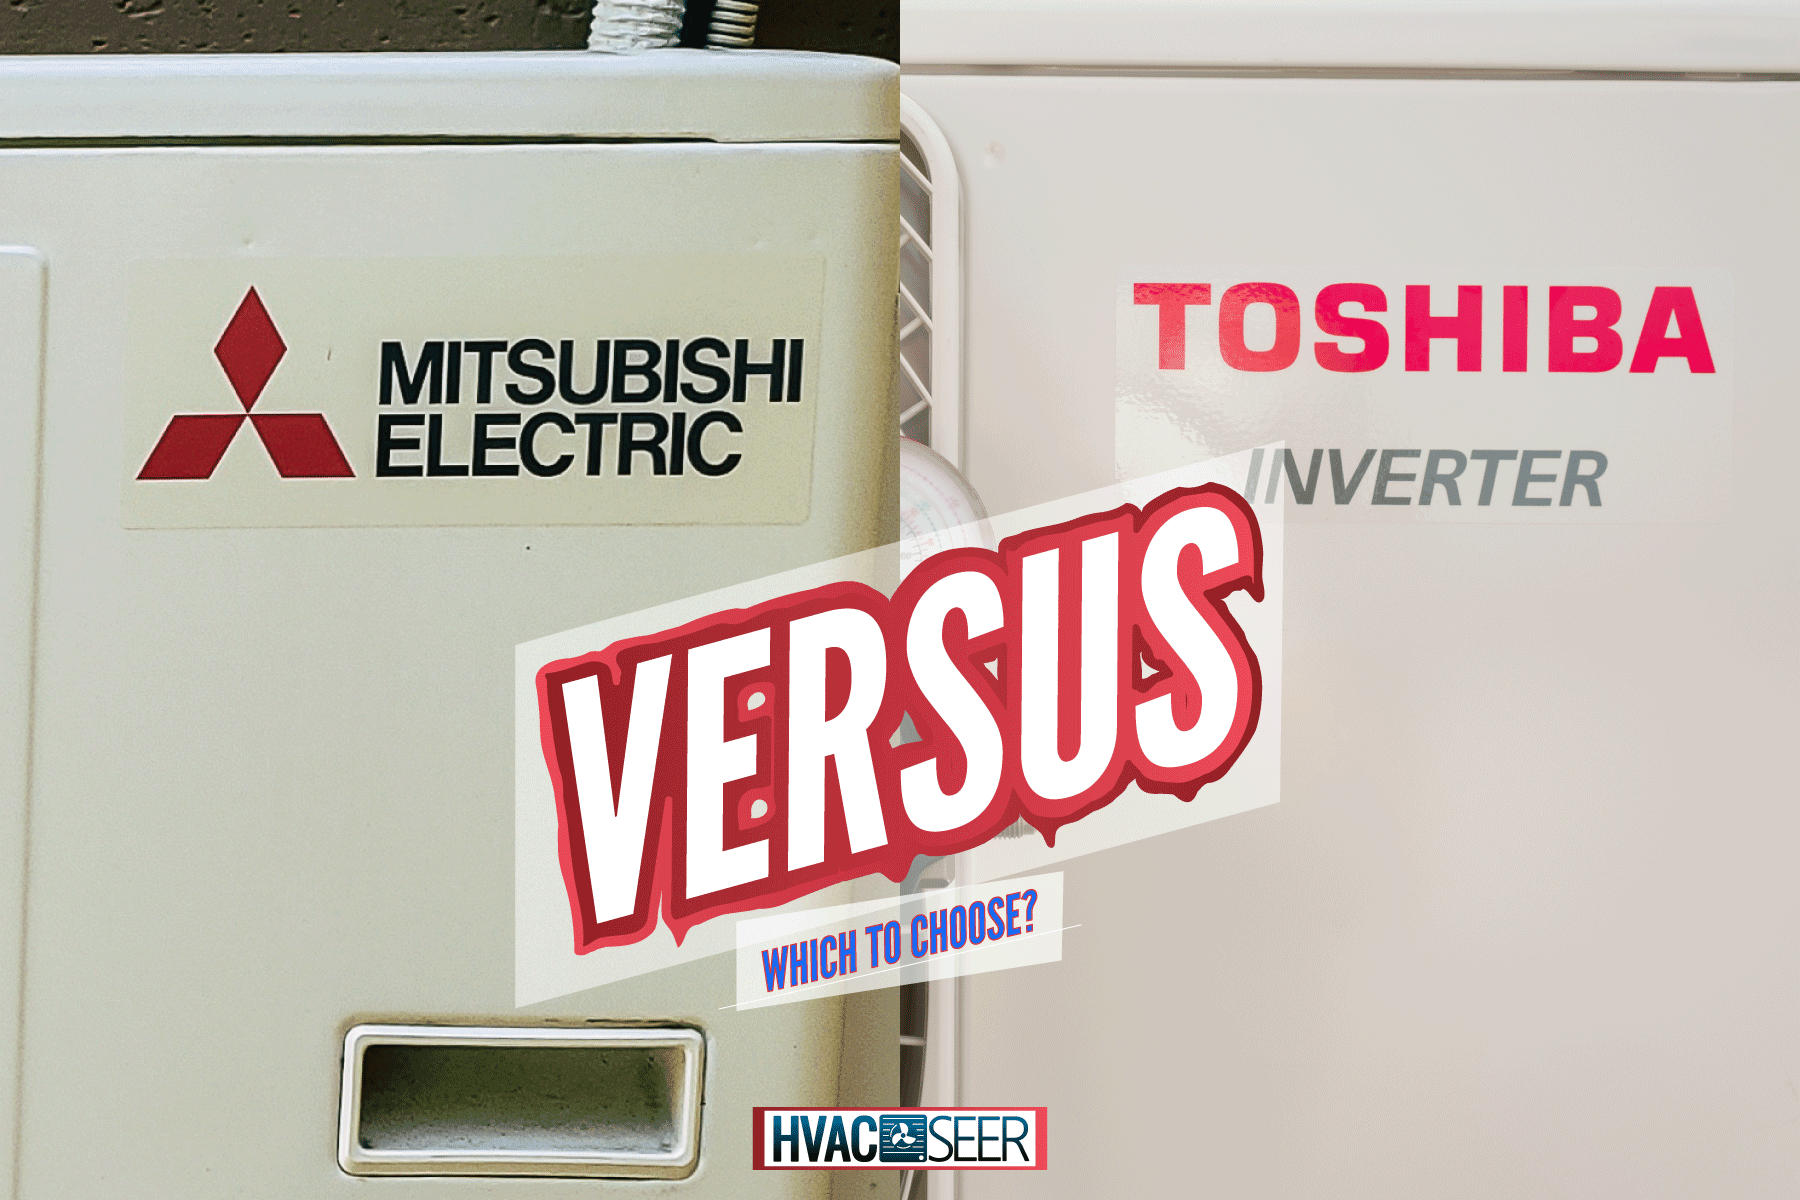 Collaged photo of Mitsubishi and Toshiba air conditioning units, Toshiba Vs Mitsubishi Air Conditioner: Which To Choose?